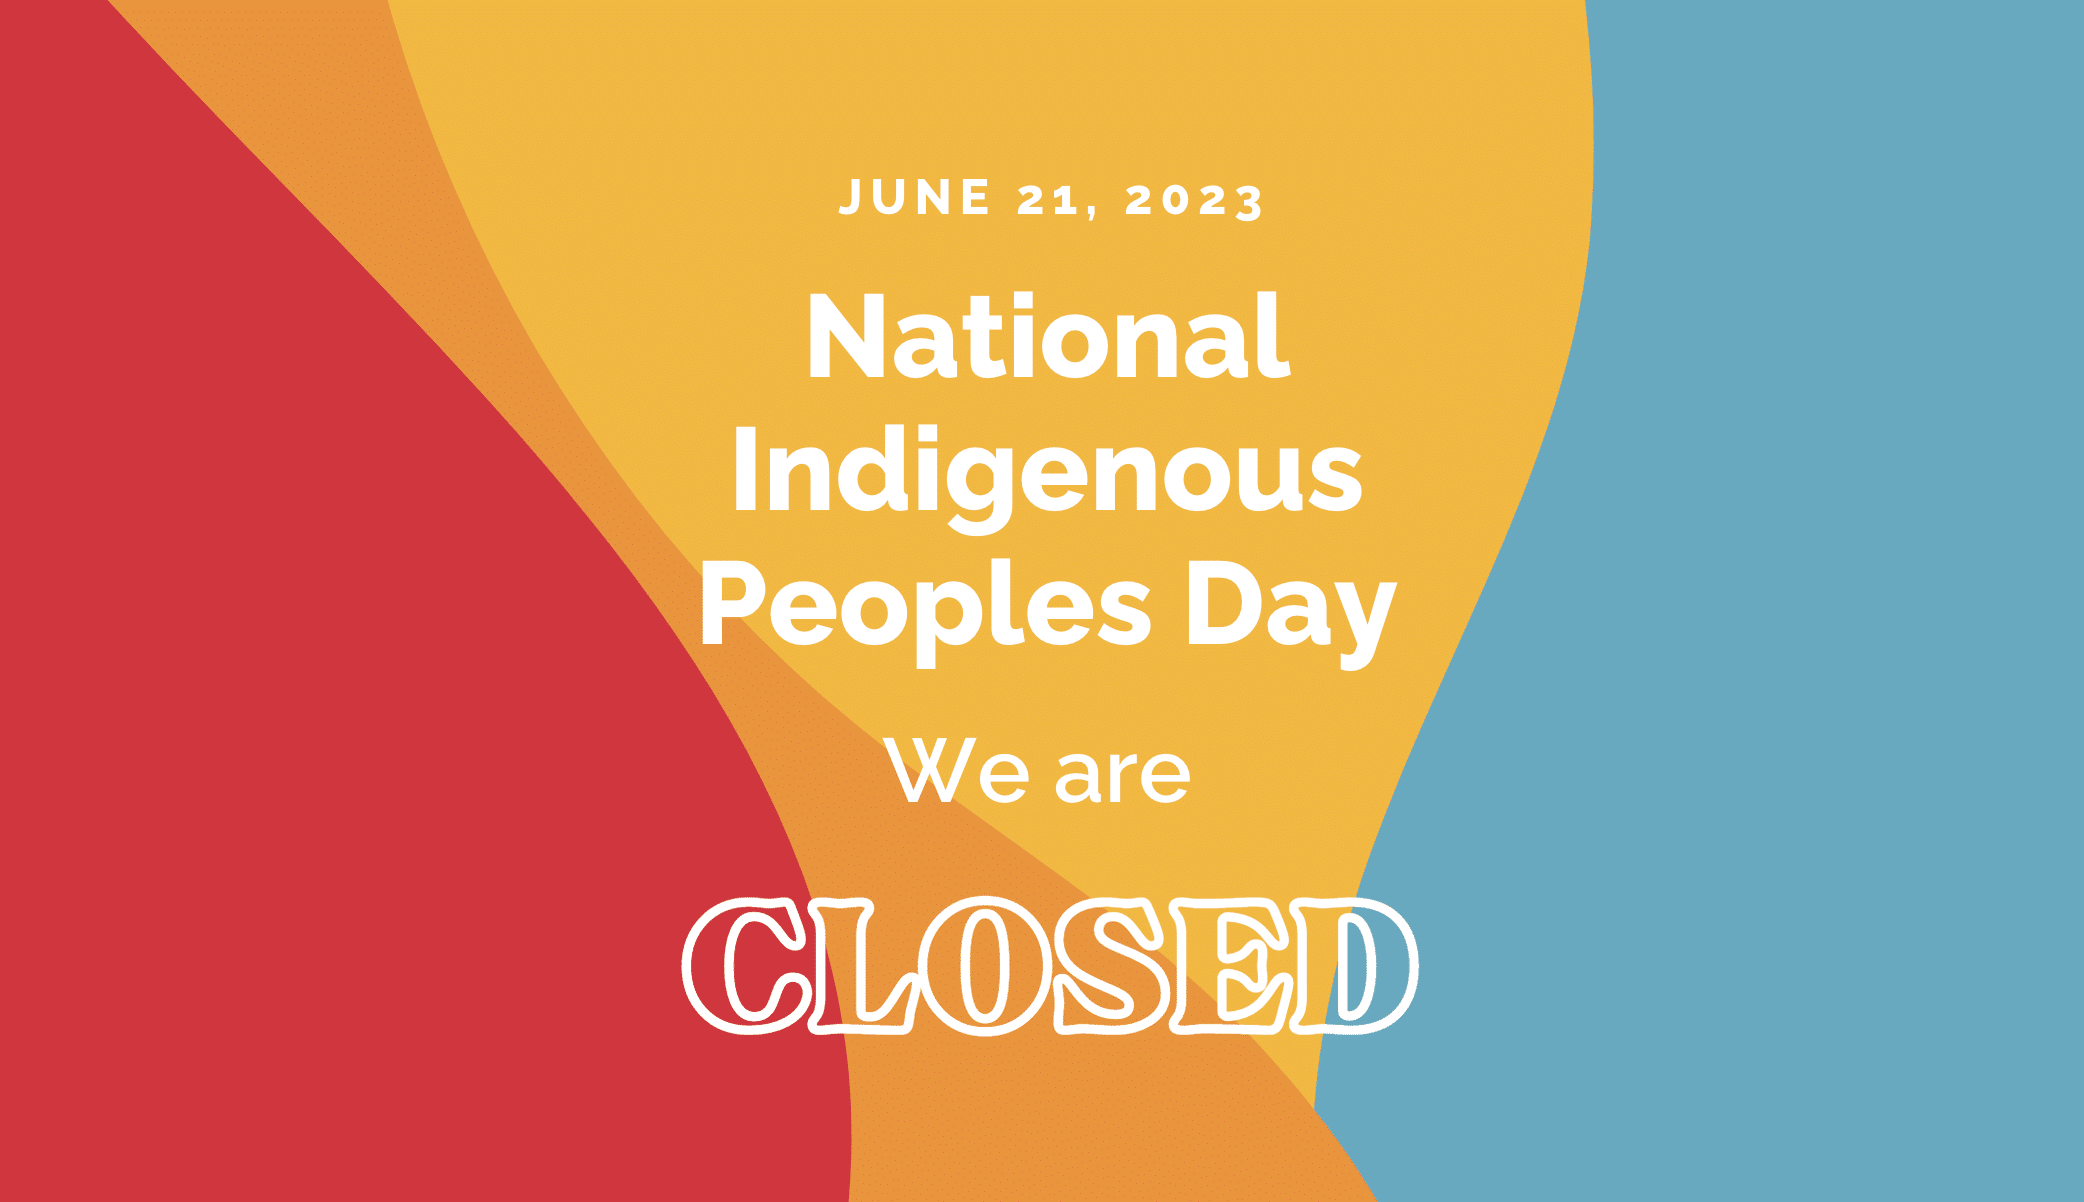 On June 21, National Indigenous People's Day, the ADAAWE Indigenous Business Hub will be closed as we honour and recognize the vibrant cultures, traditions and contributions of Indigenous peoples across Canada.